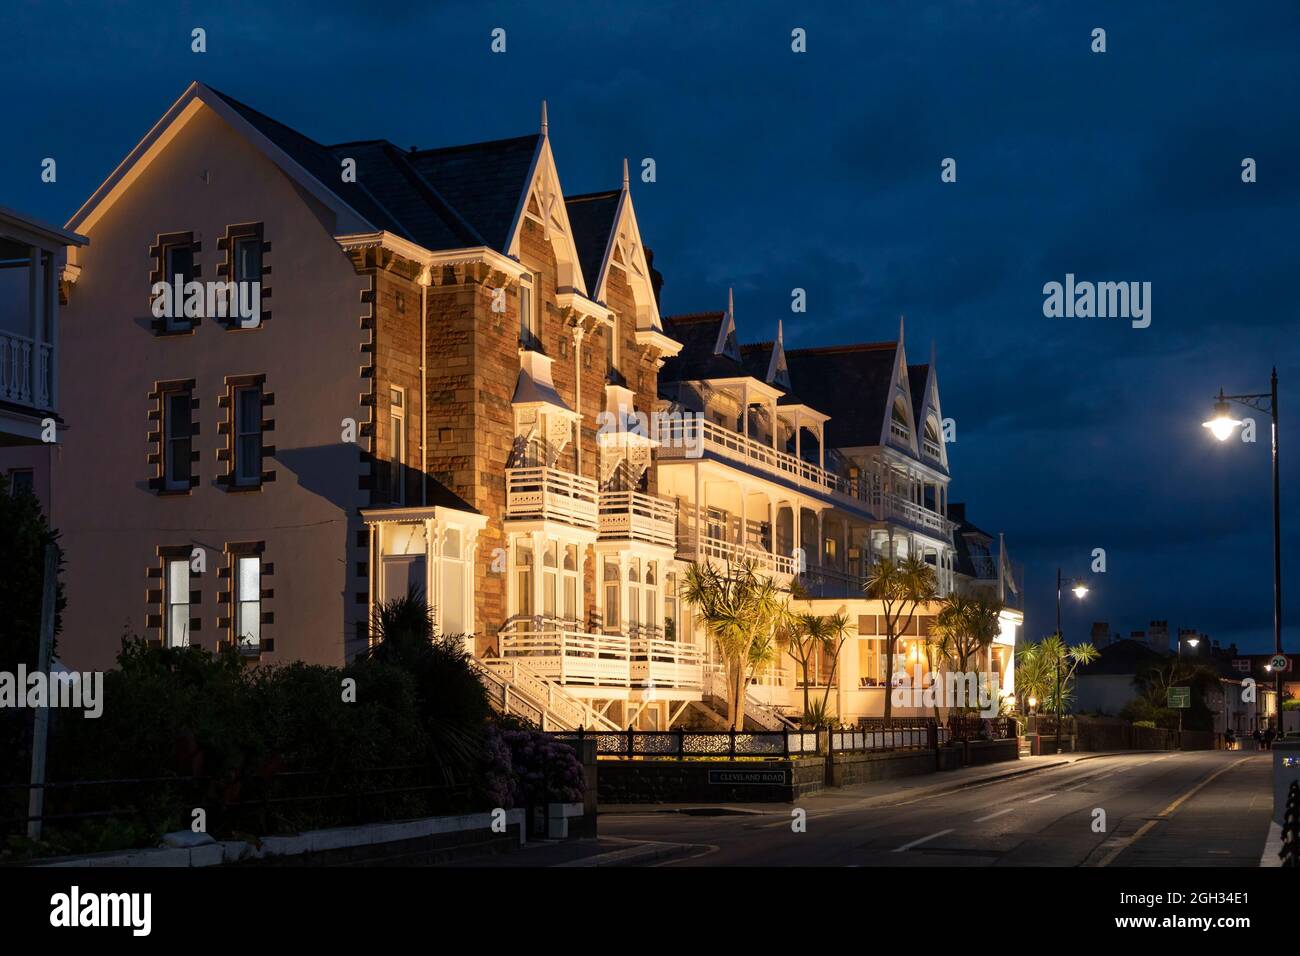 ST HELIER, JERSEY, CHANNEL ISLANDS - AUGUST 08, 2021: Exterior view of Ommaroo  Hotel on Havre des Pas at night Stock Photo - Alamy